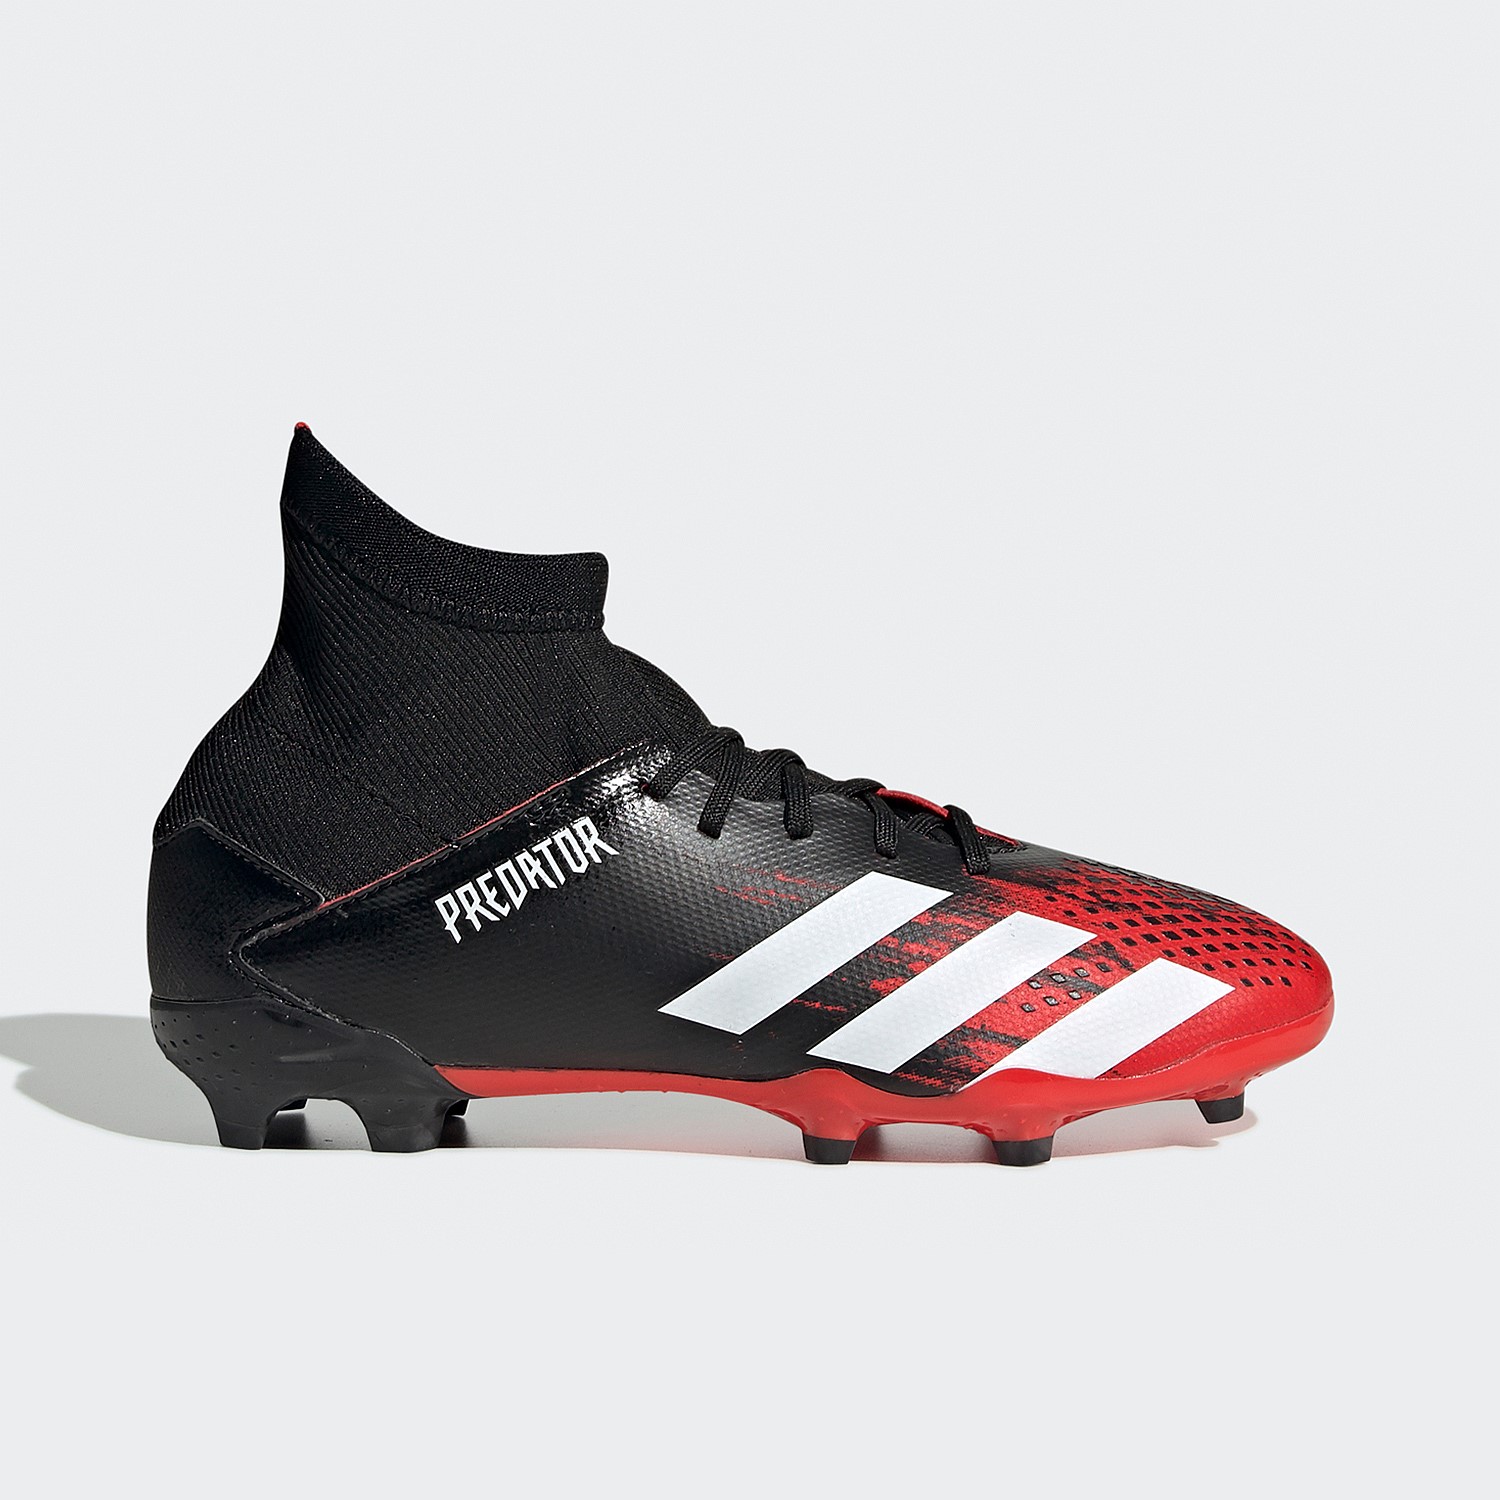 Sale | Men's, Women's and Kid's Sale Online | Stirling Sports - Predator  20.3 Firm-Ground Football Boots Kids